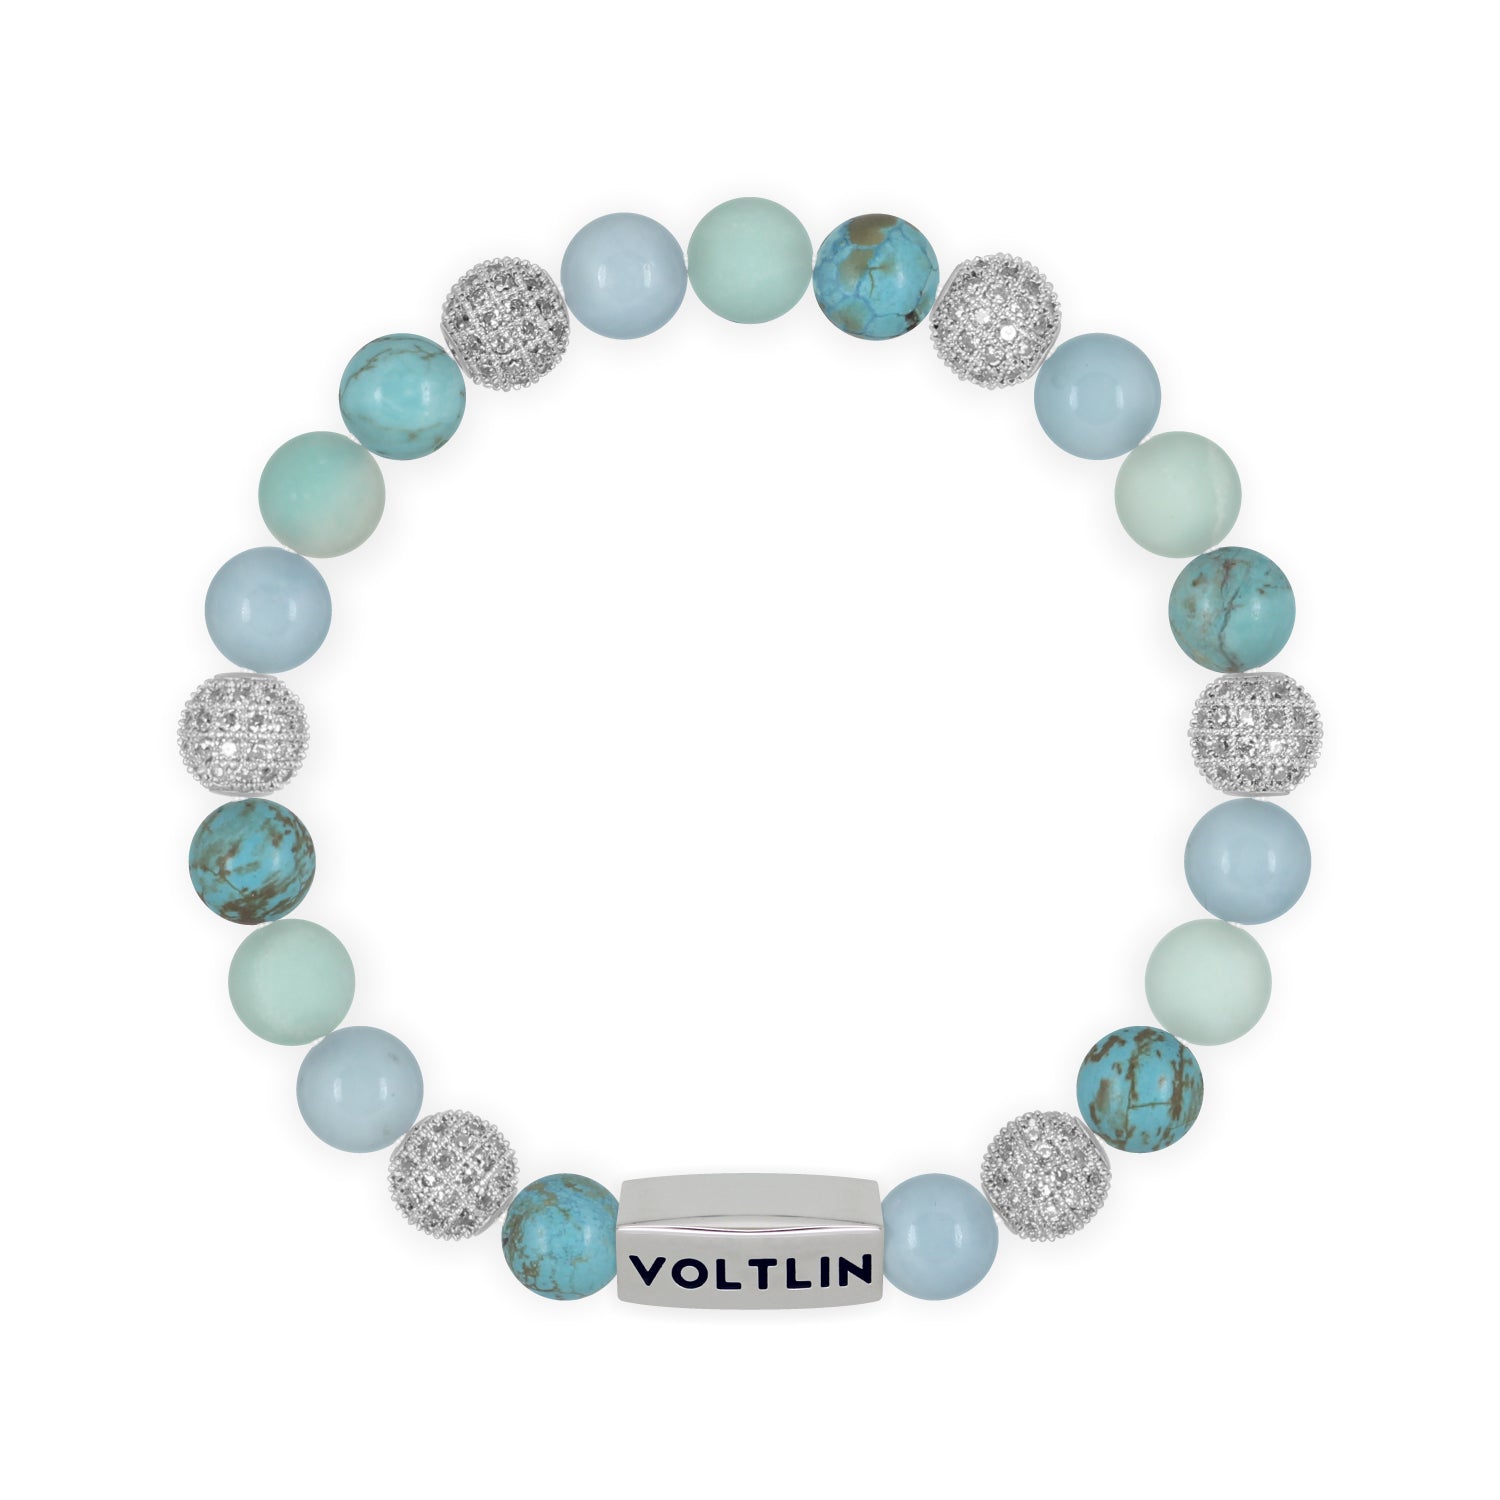 Front view of an 8mm Turquoise Sirius beaded stretch bracelet featuring Turquoise, Silver Pave, Aquamarine, & Matte Amazonite crystal and silver stainless steel logo bead made by Voltlin